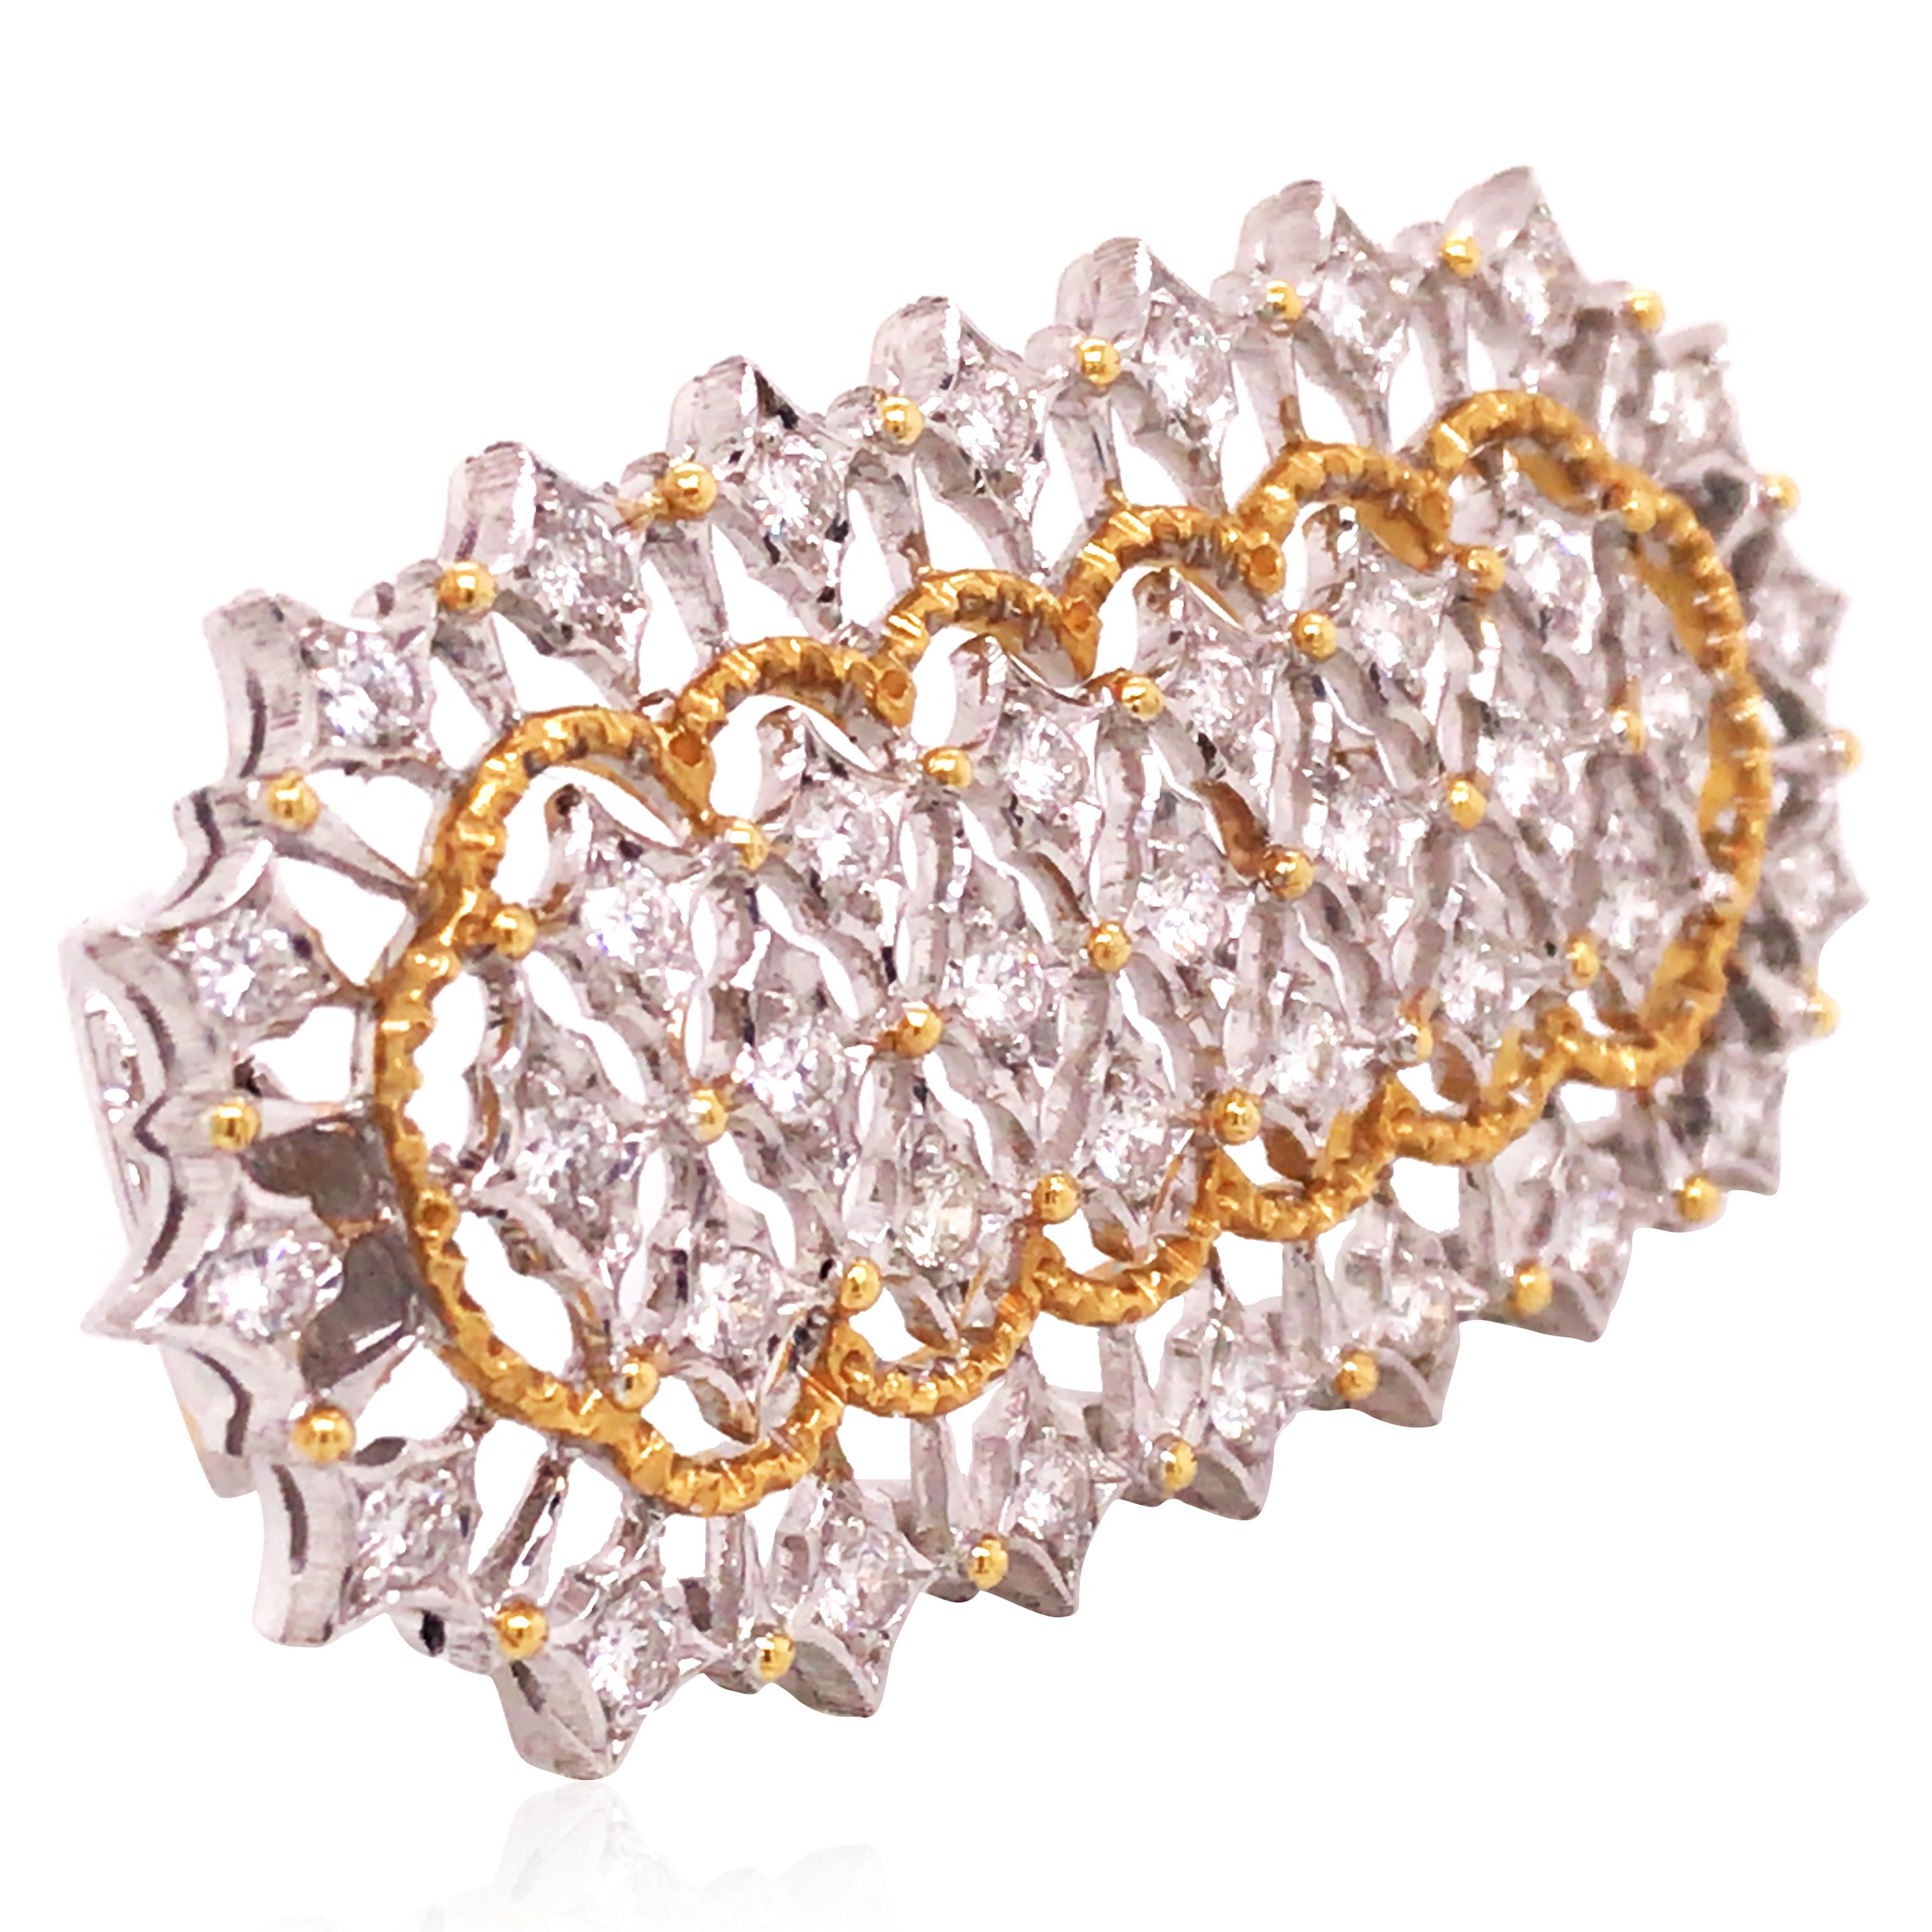 This exquisite Buccellati diamond brooch consists of 39 round-cut diamonds approx. 1.17ct in total. 

Diamond: 1.17ct
Weight:  9.9 grams
Measurement:  4.3 x 2.3cm